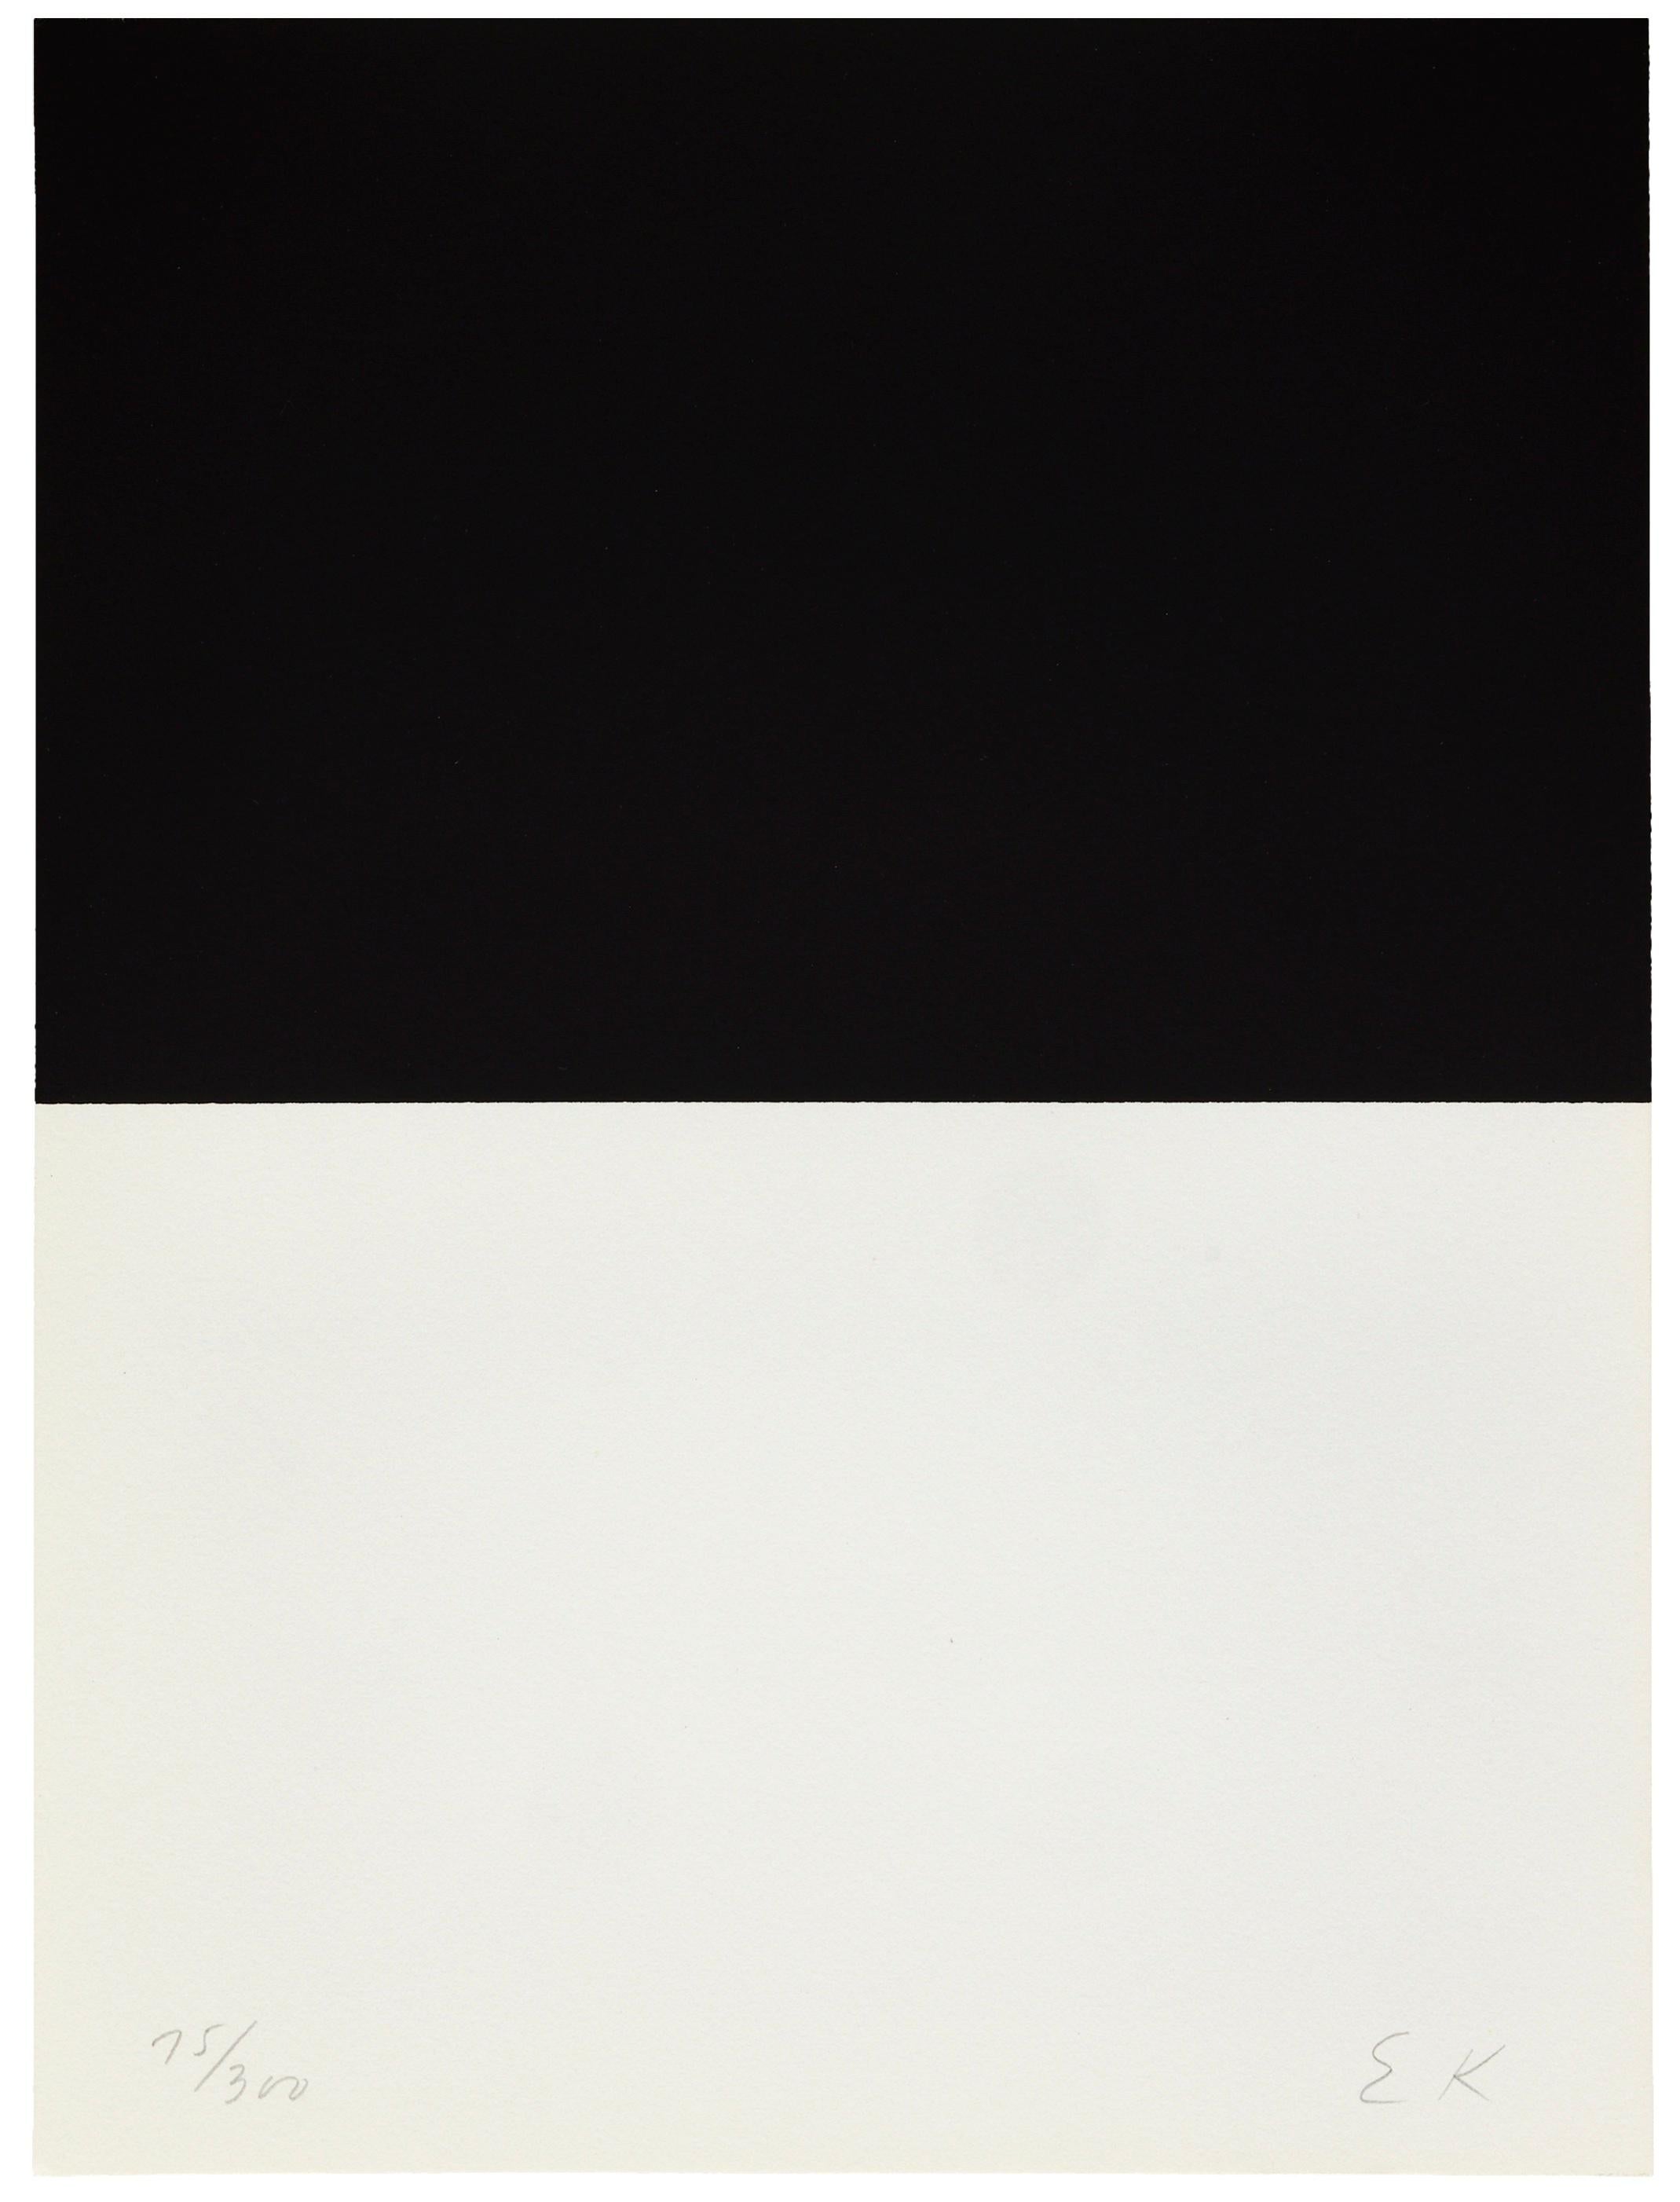 Untitled, 1973
Ellsworth Kelly

Screenprint, on BFK Rives wove
Signed and numbered from the edition of 300 
With the artist's copyright inkstamp verso
From The New York Collection for Stockholm
Printed by Styria Studio Inc., New York
Published by